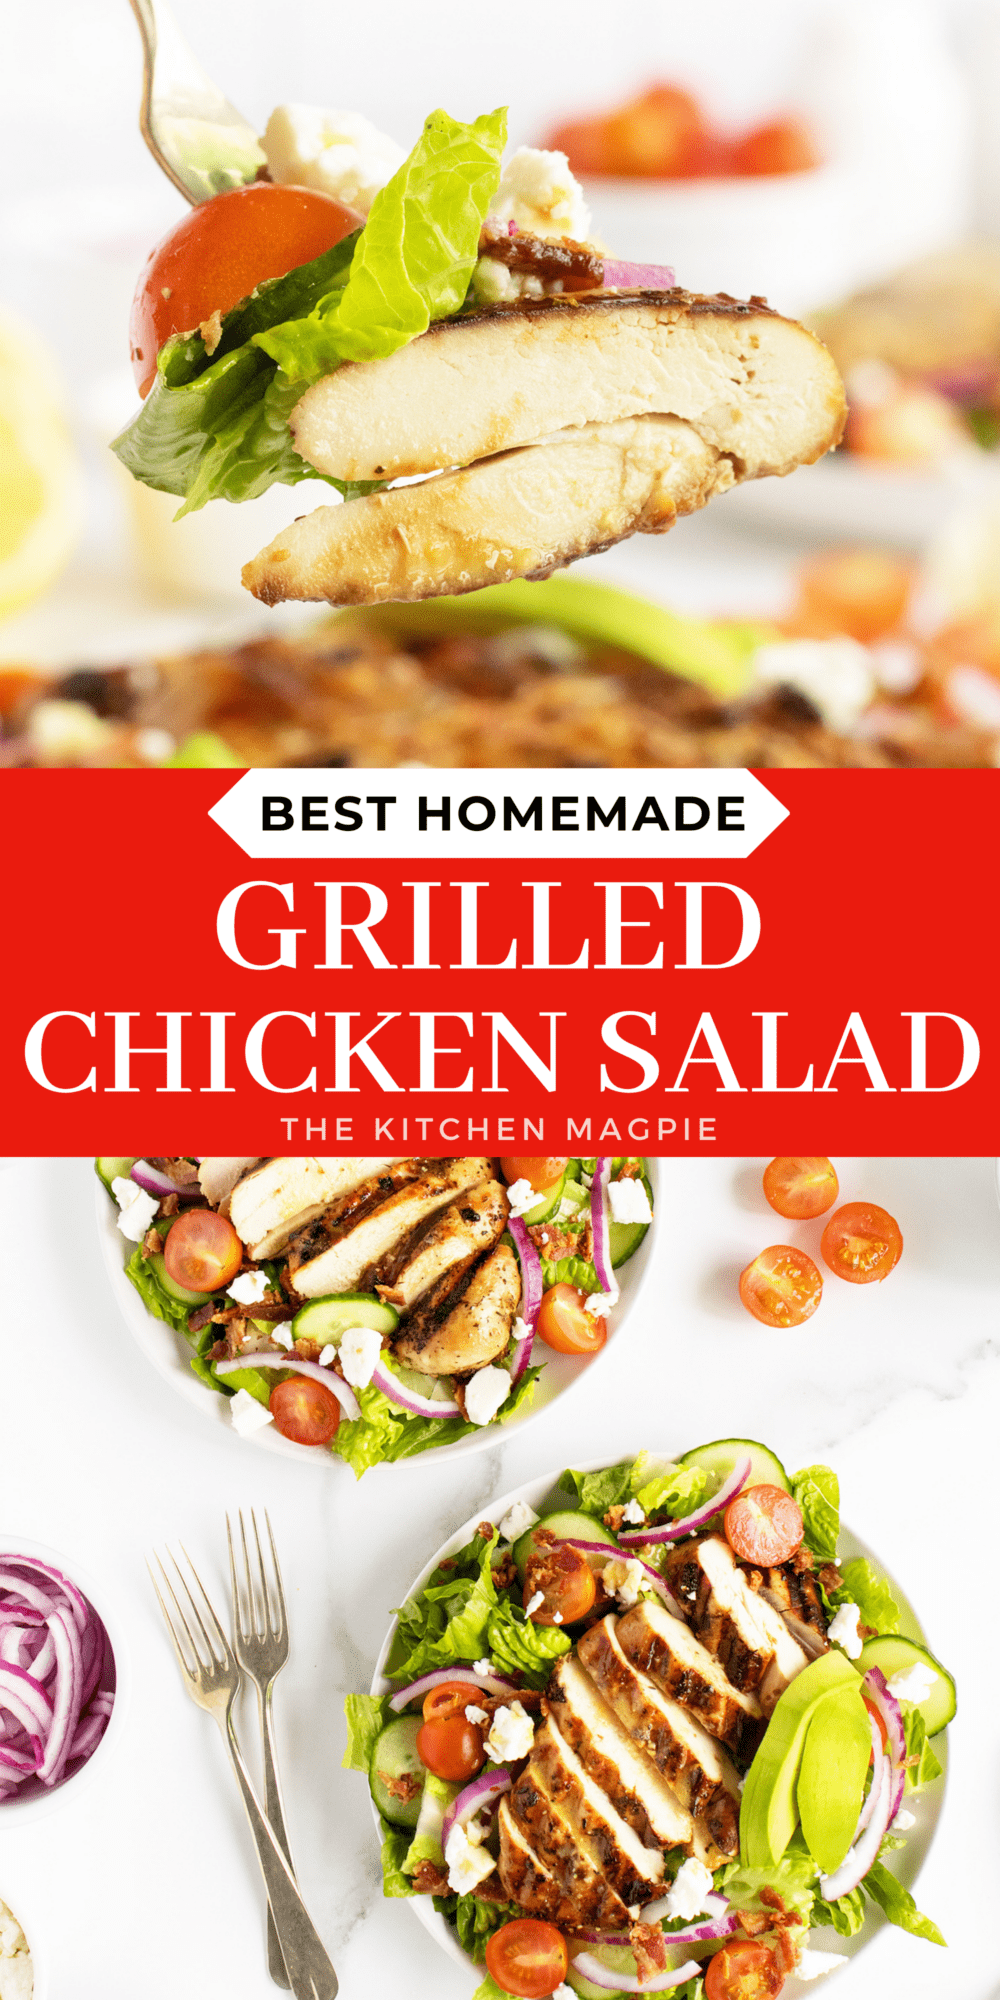 This grilled chicken salad is bursting with fresh summertime flavors, as well as some simple yet intensely flavored grilled chicken.